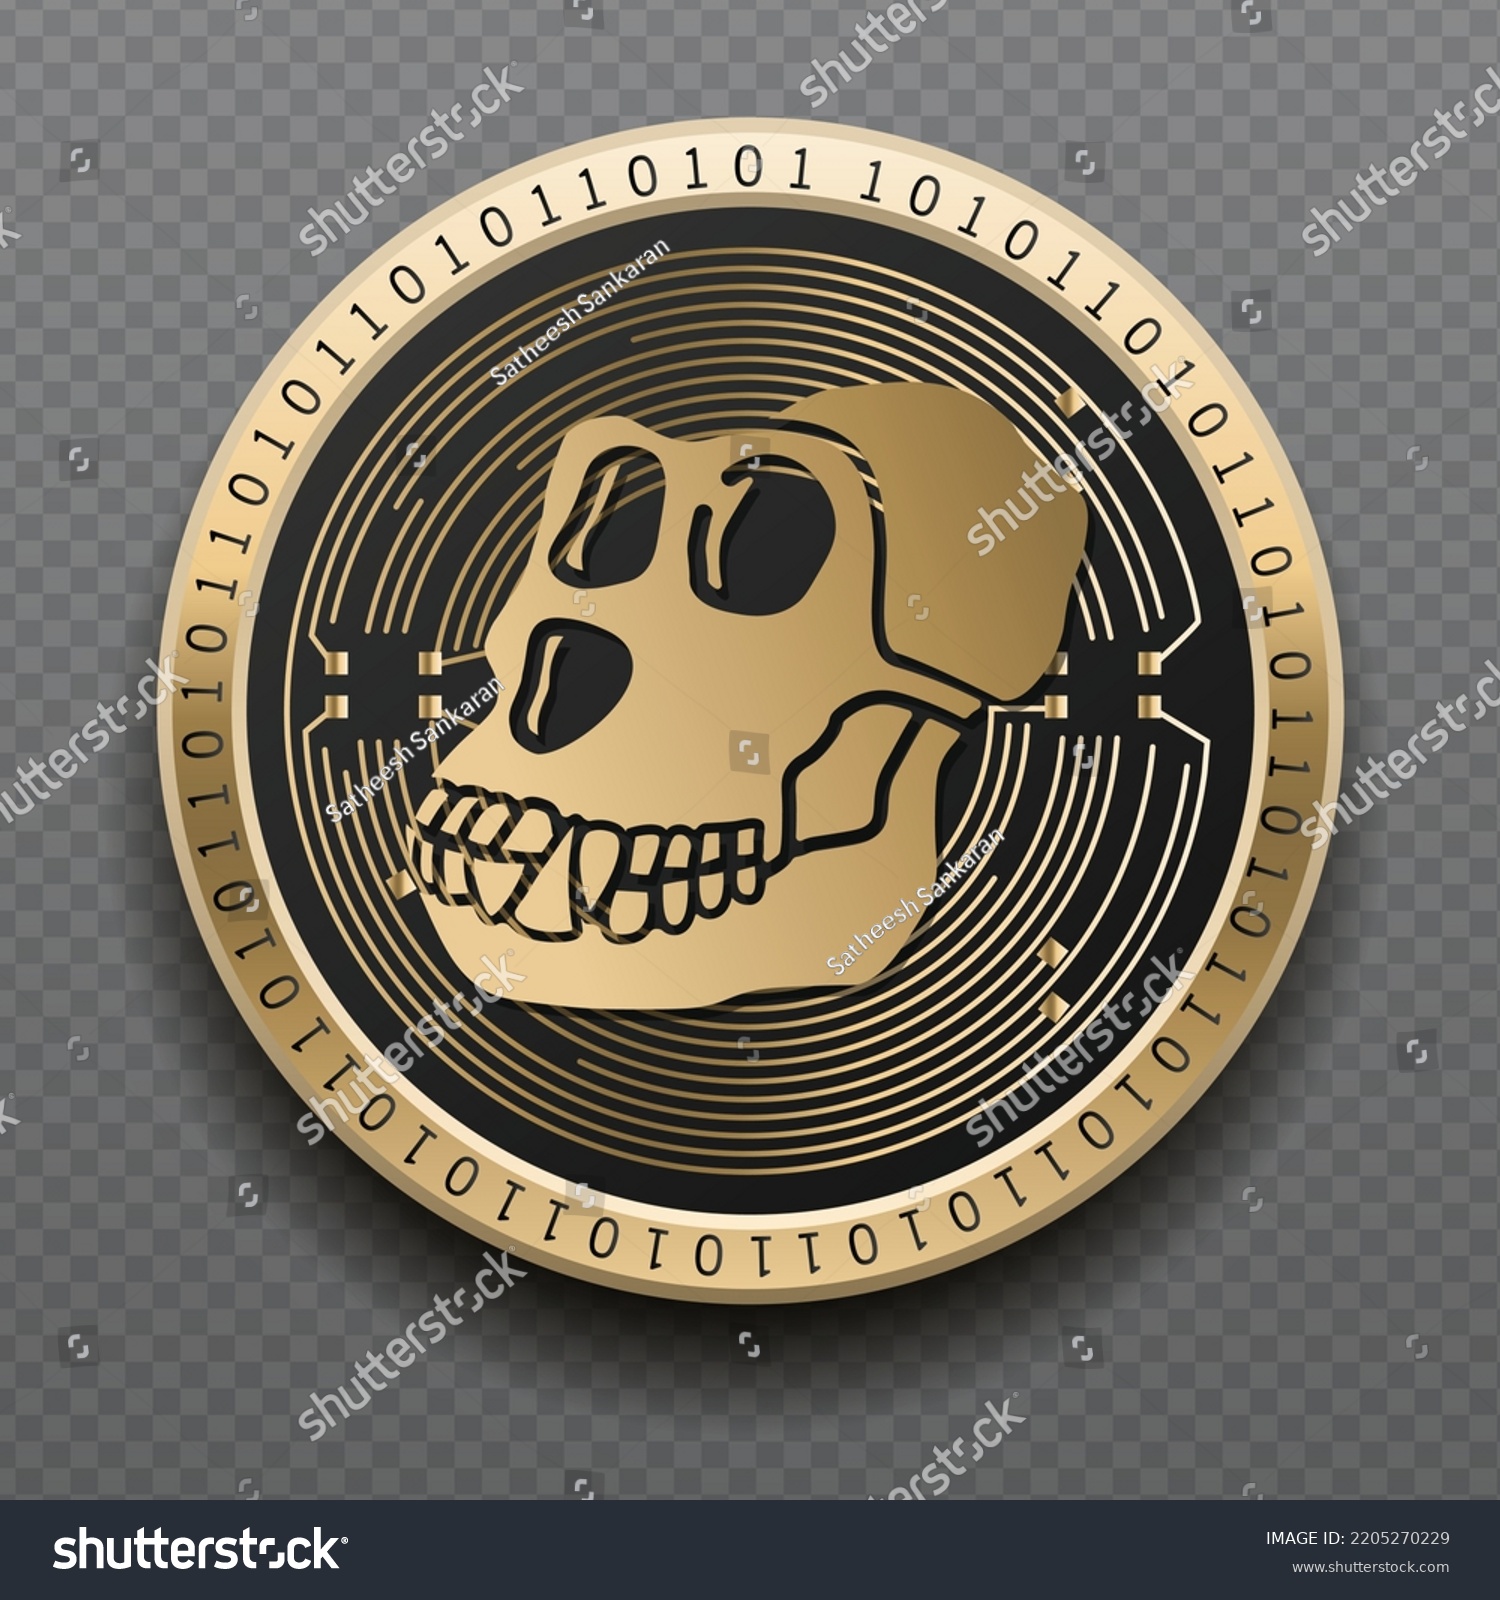 SVG of Apecoin (APE) cryptocurrency golden coin isolated in transparent background. Virtual currency token symbol vector illustration based on cryptography and block chain technology. svg